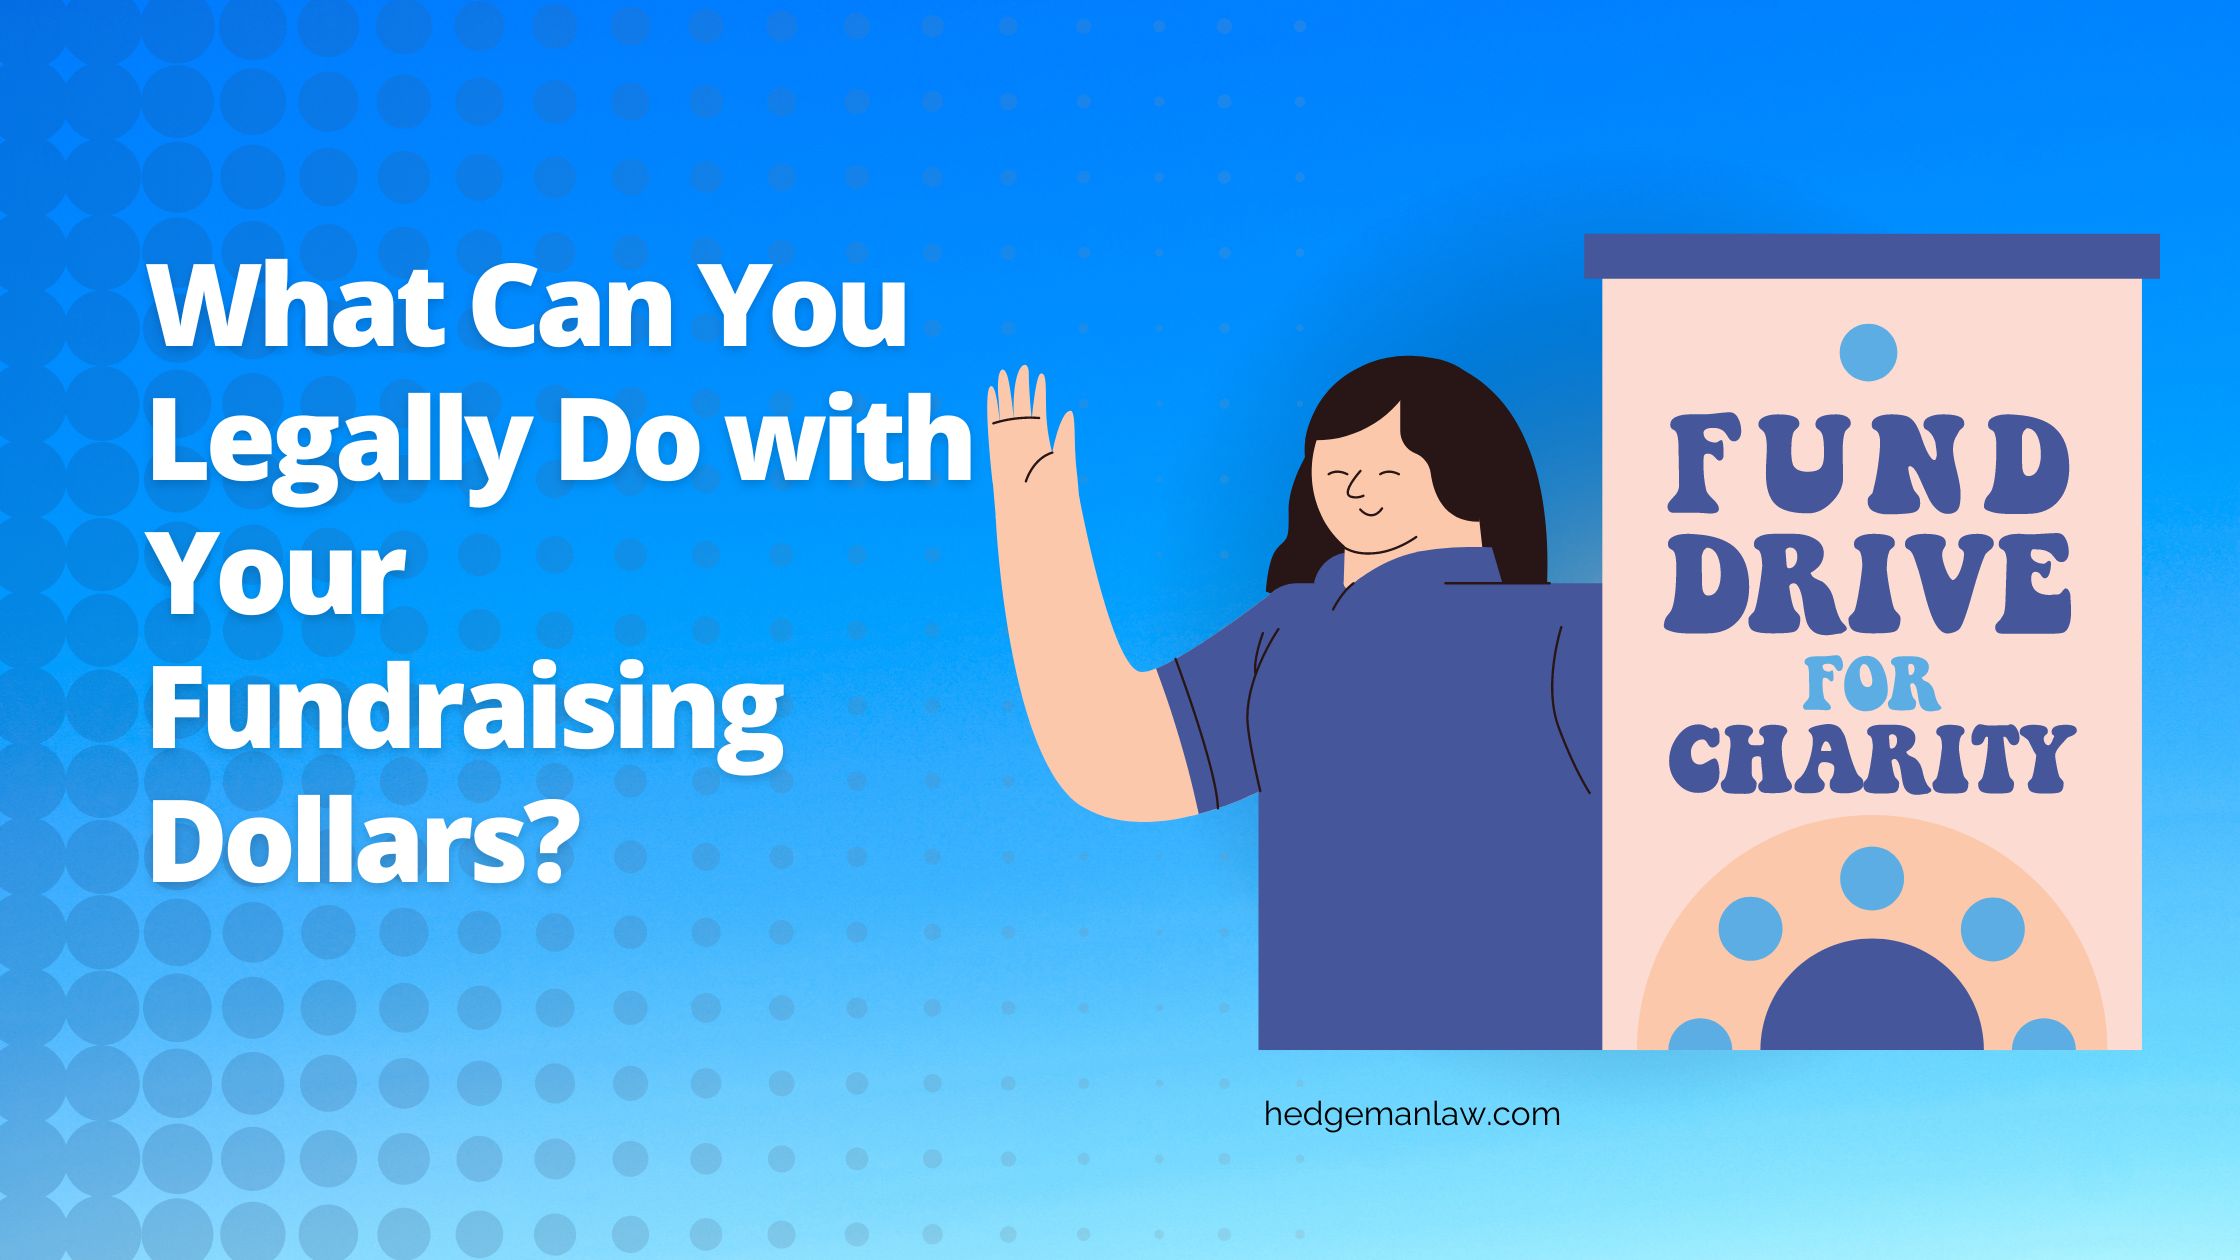 What Can You Legally Do with Your Fundraising Dollars?